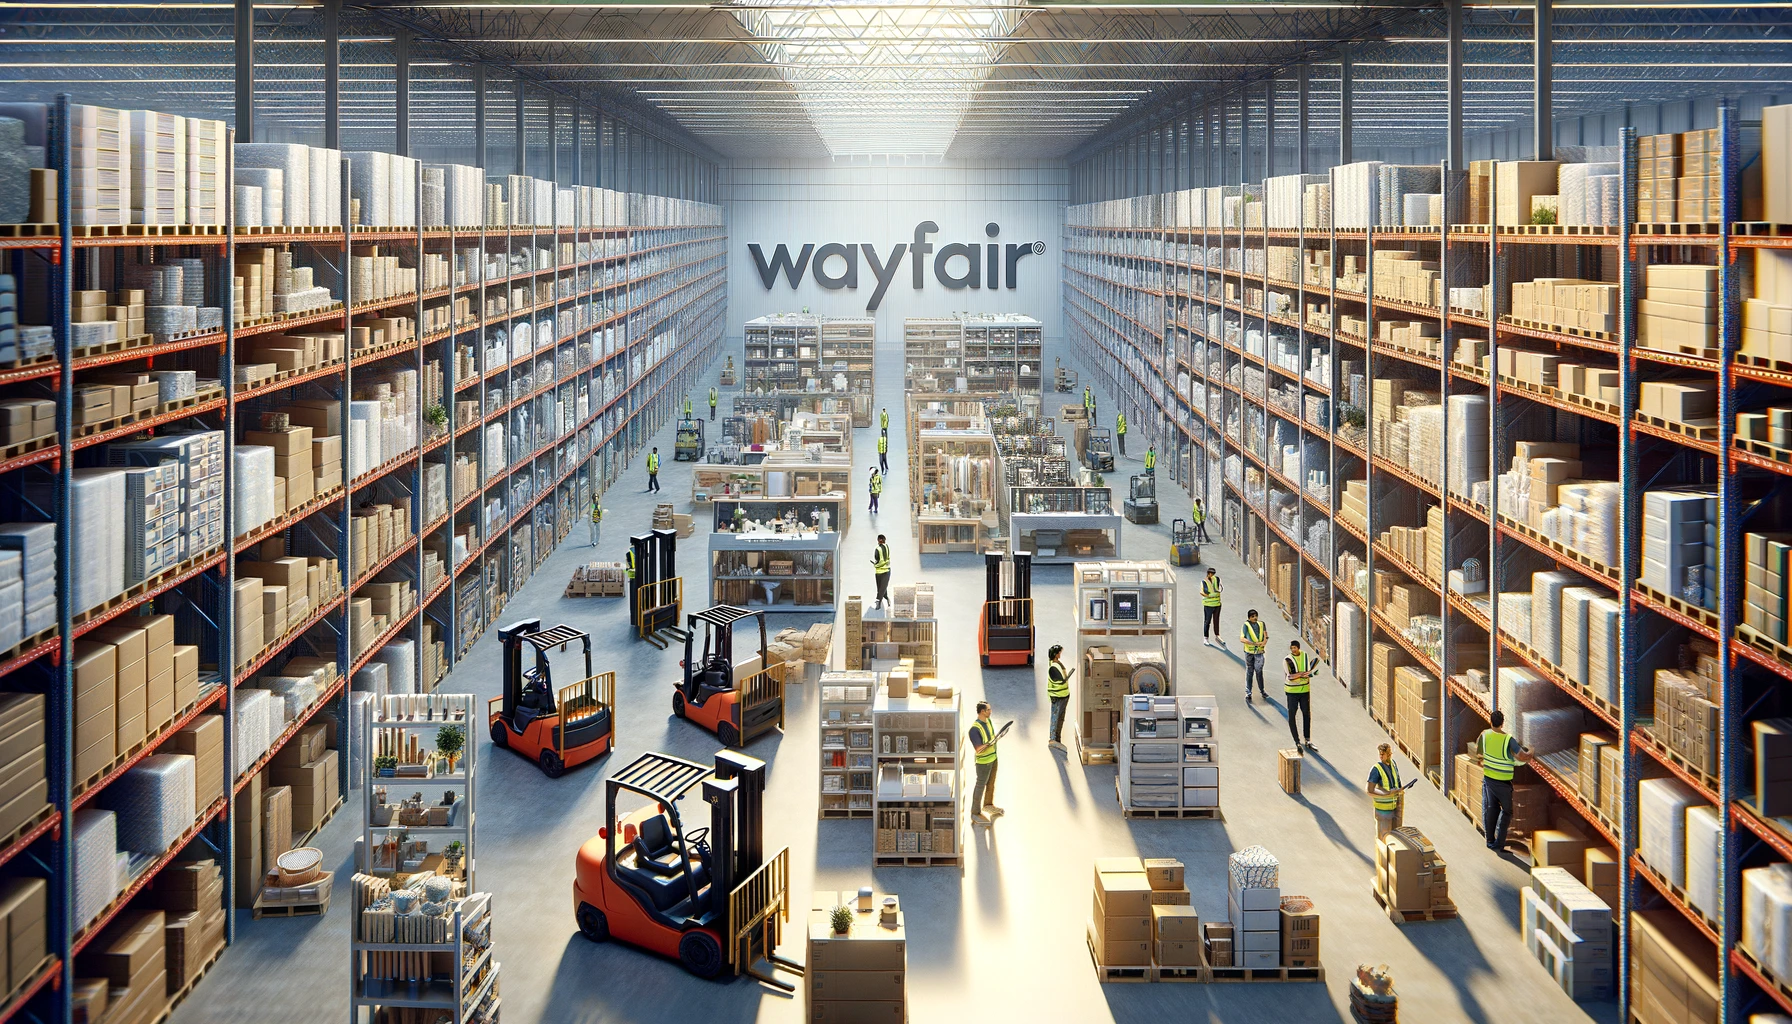 The wayfair factory preparing to ship consolidated deliveries